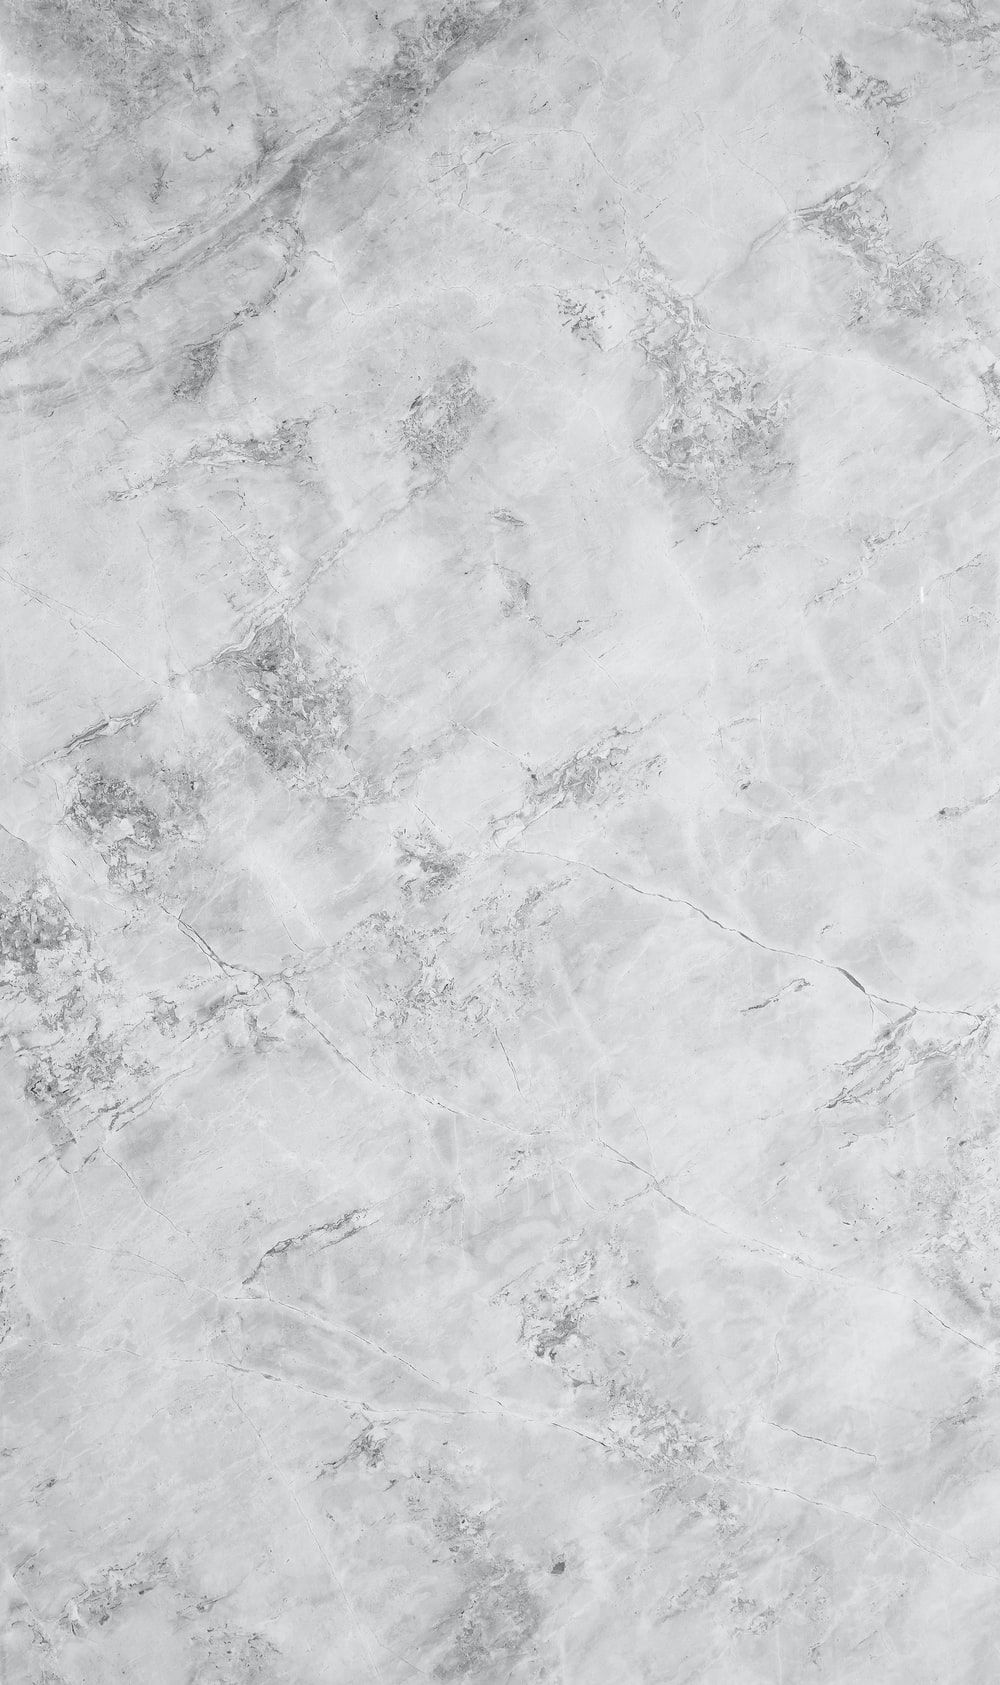 Grey Texture Picture [HQ]. Download Free Image